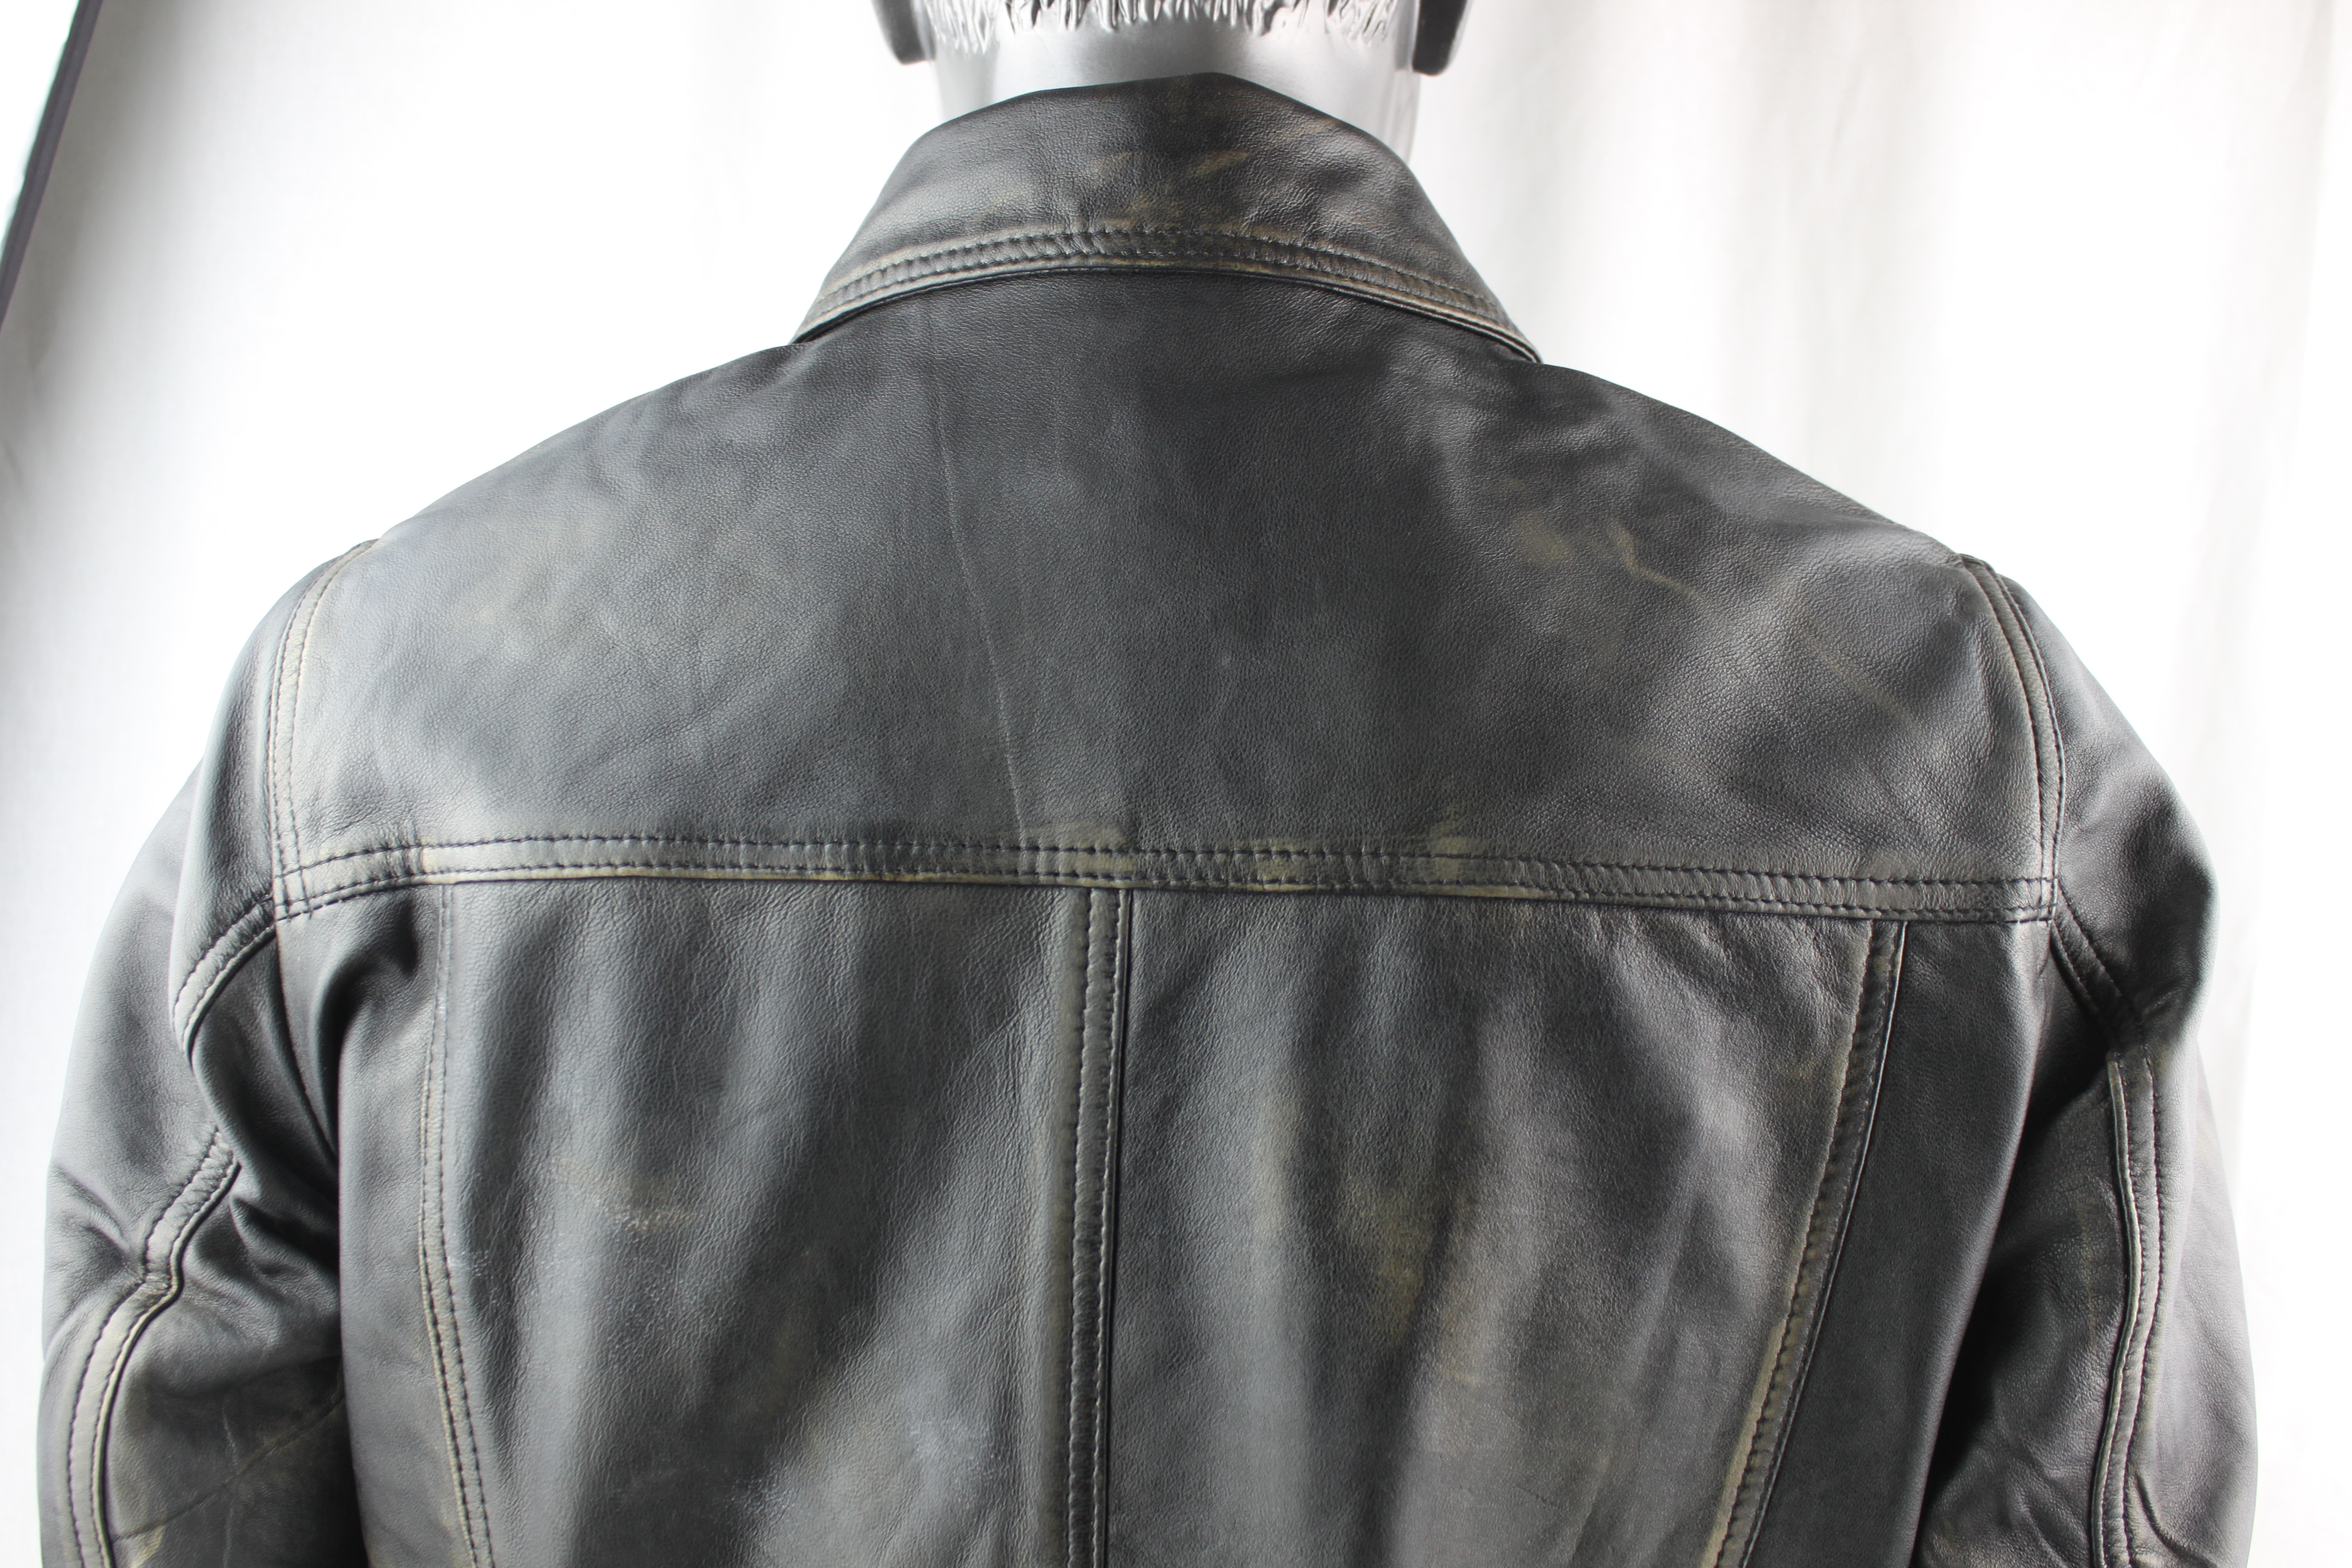 Men's Leather Denim Style Jacket in Vintage Look Leather